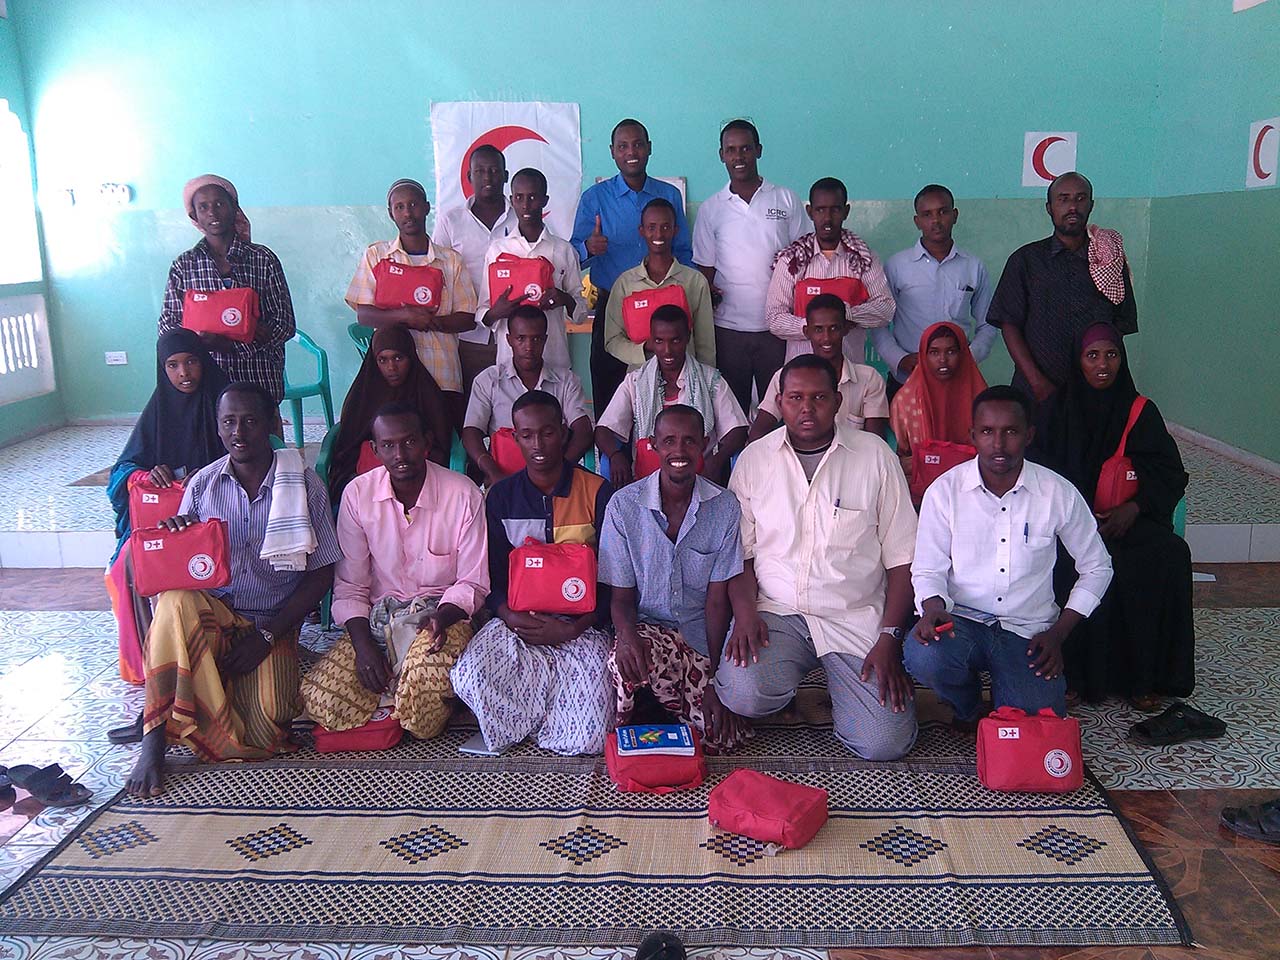 The training, which took place on 29 June 2015, drewparticipants from 12 different villages in Galgaduud region. They will be the community’s first response in case of an emergency. ©ICRC/Bishar Osman